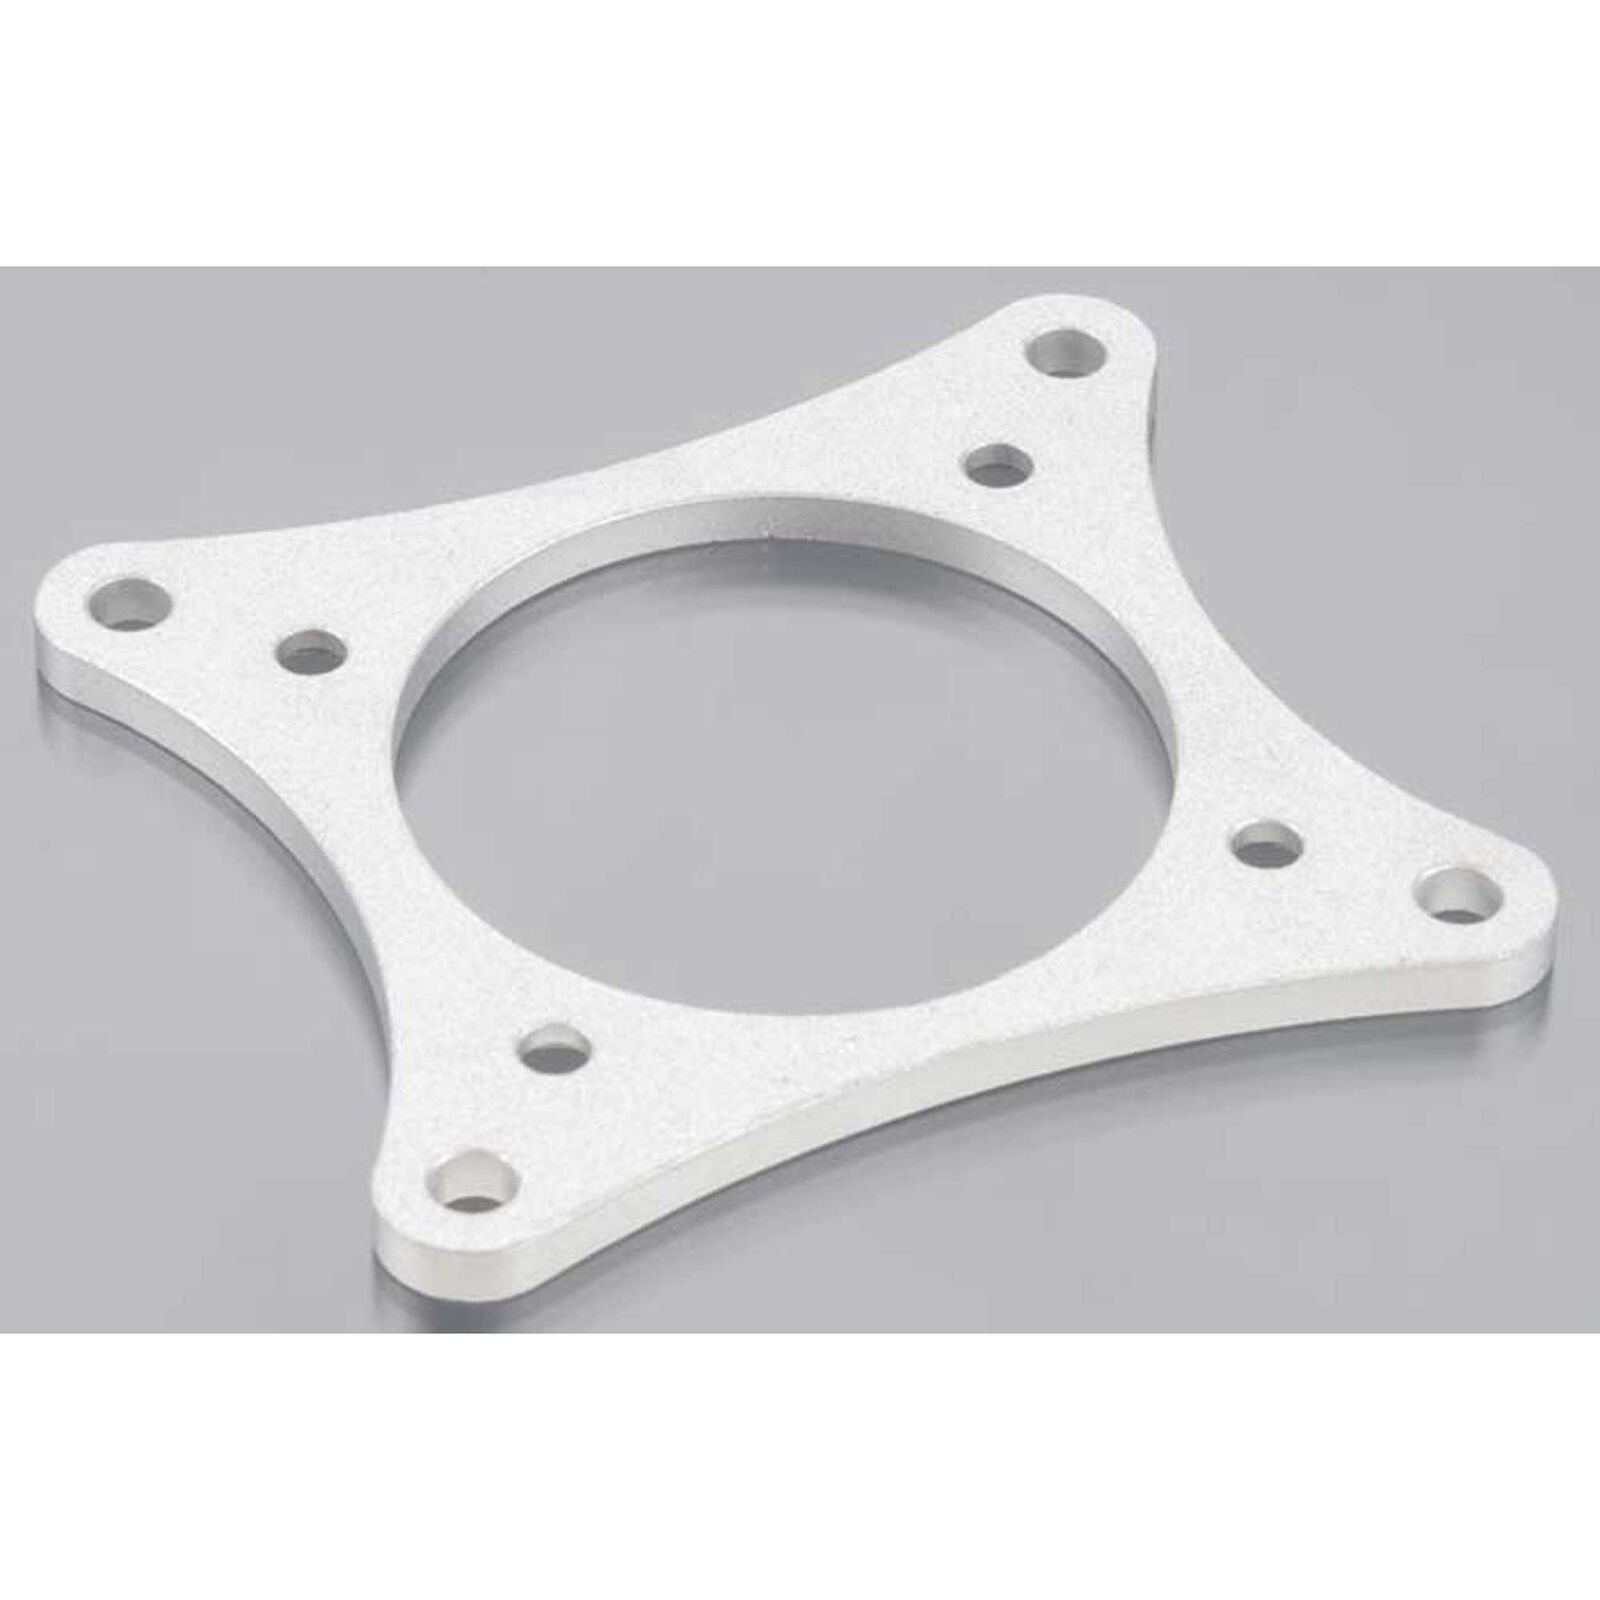 Engine Mount Plate: DLE-111